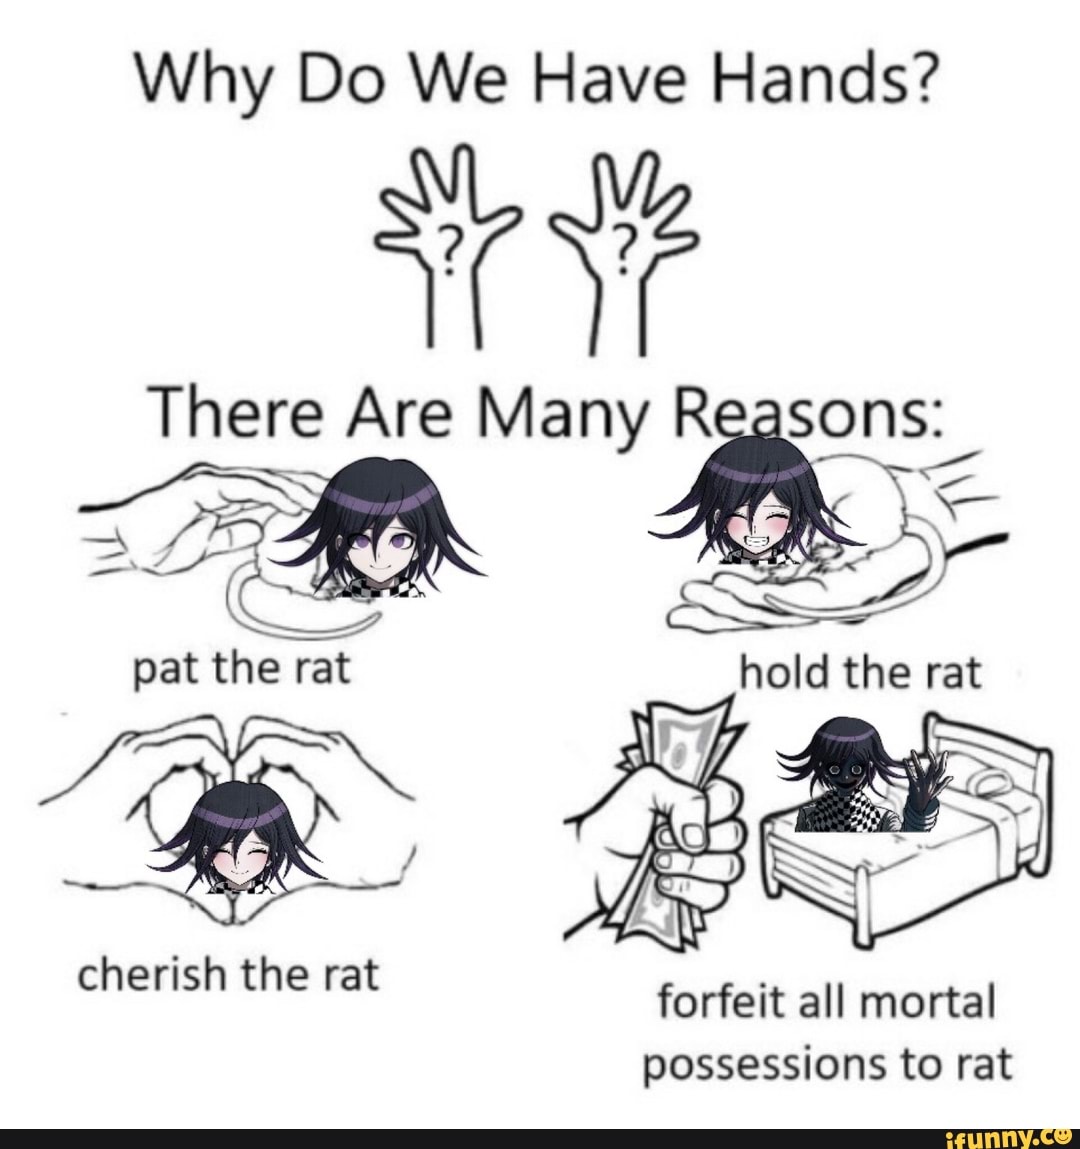 Why Do We Have Hands? There Are Many R- . A pat the rat forf